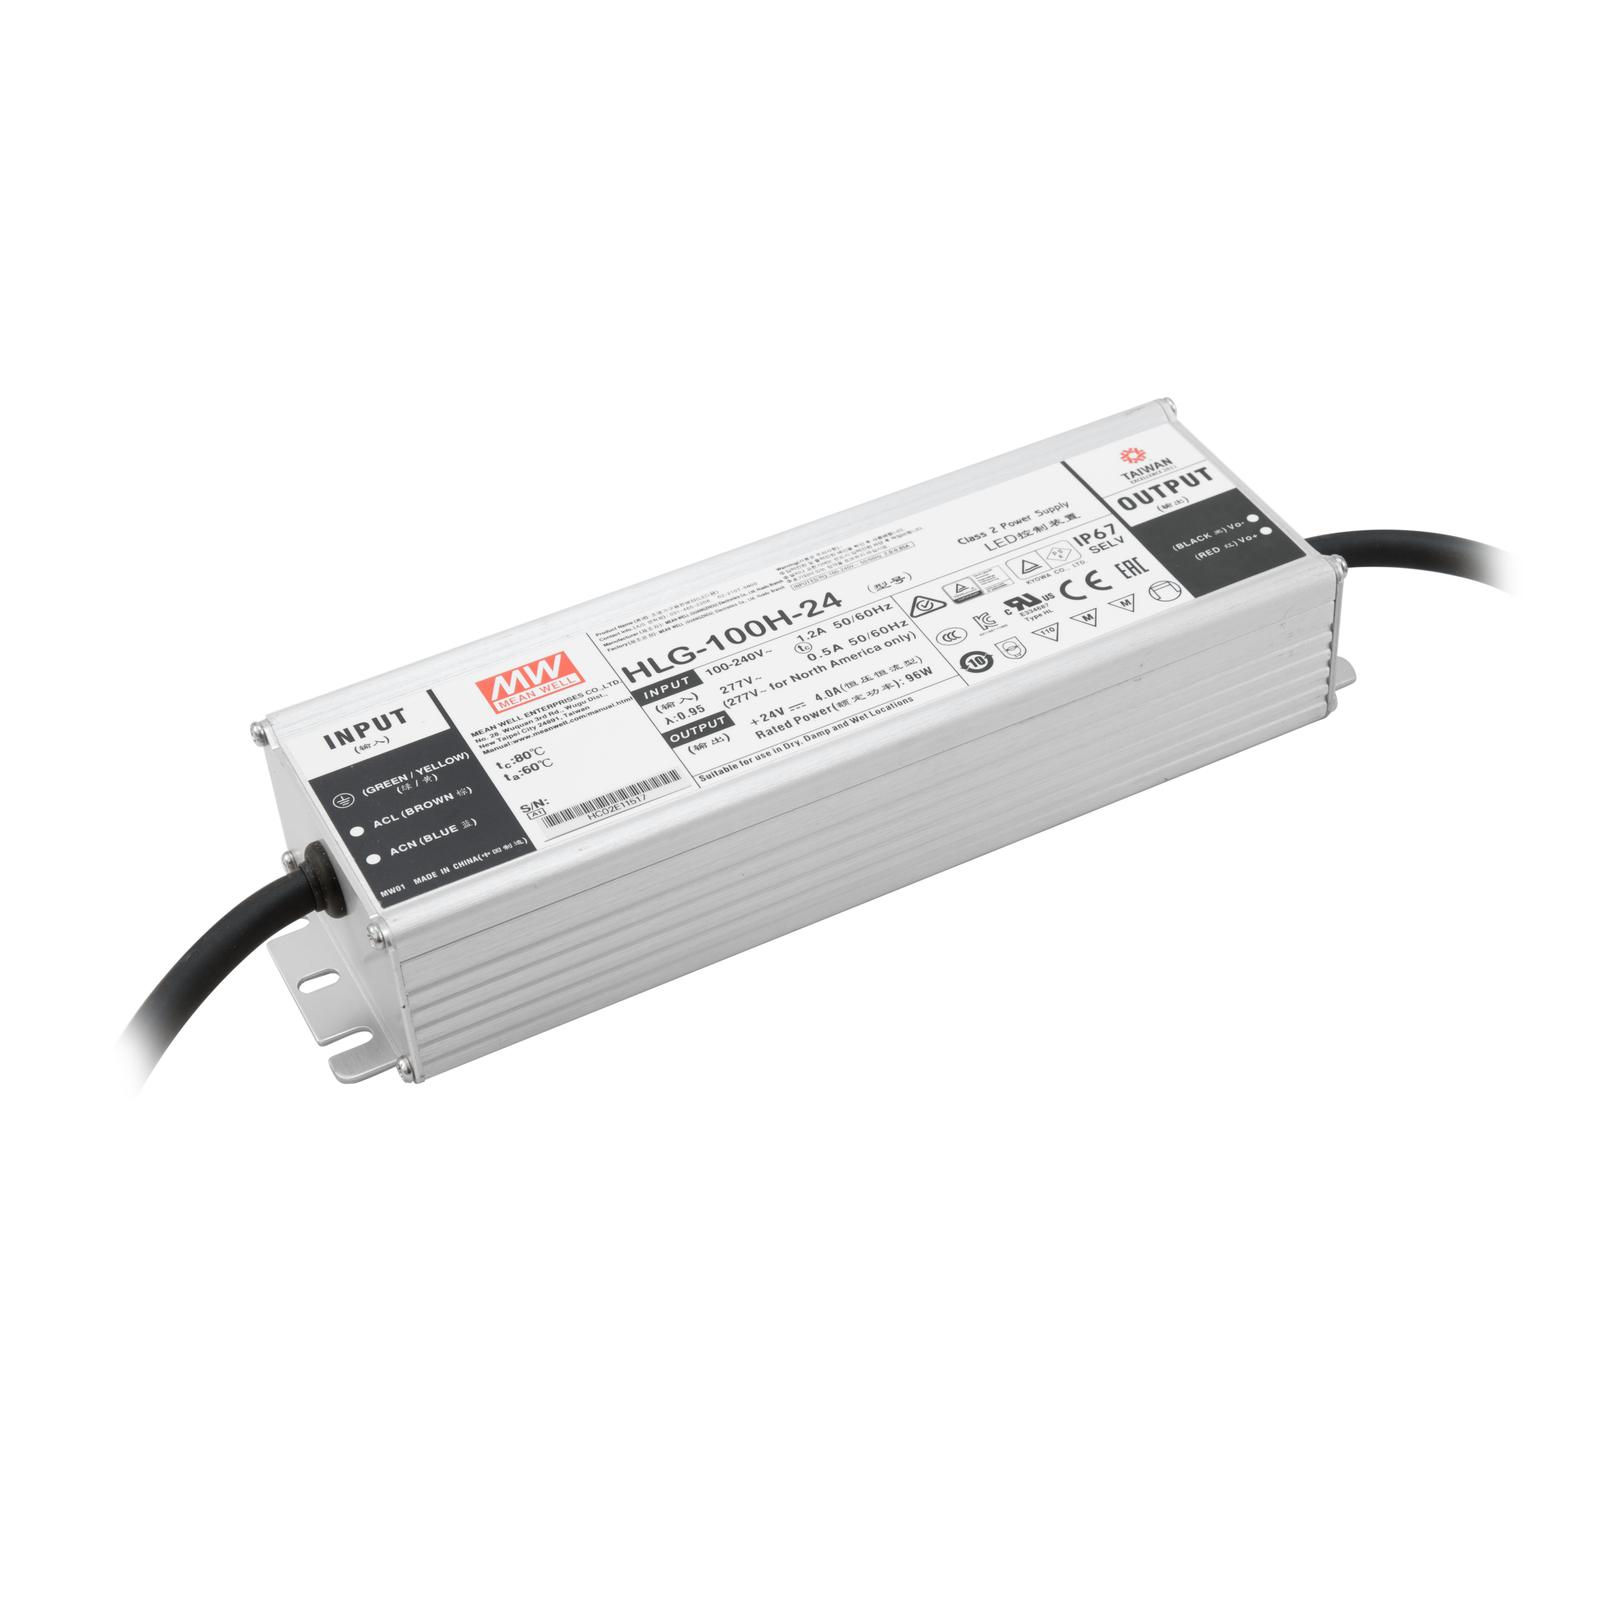 MEANWELL LED Power Supply 192W / 12V IP67